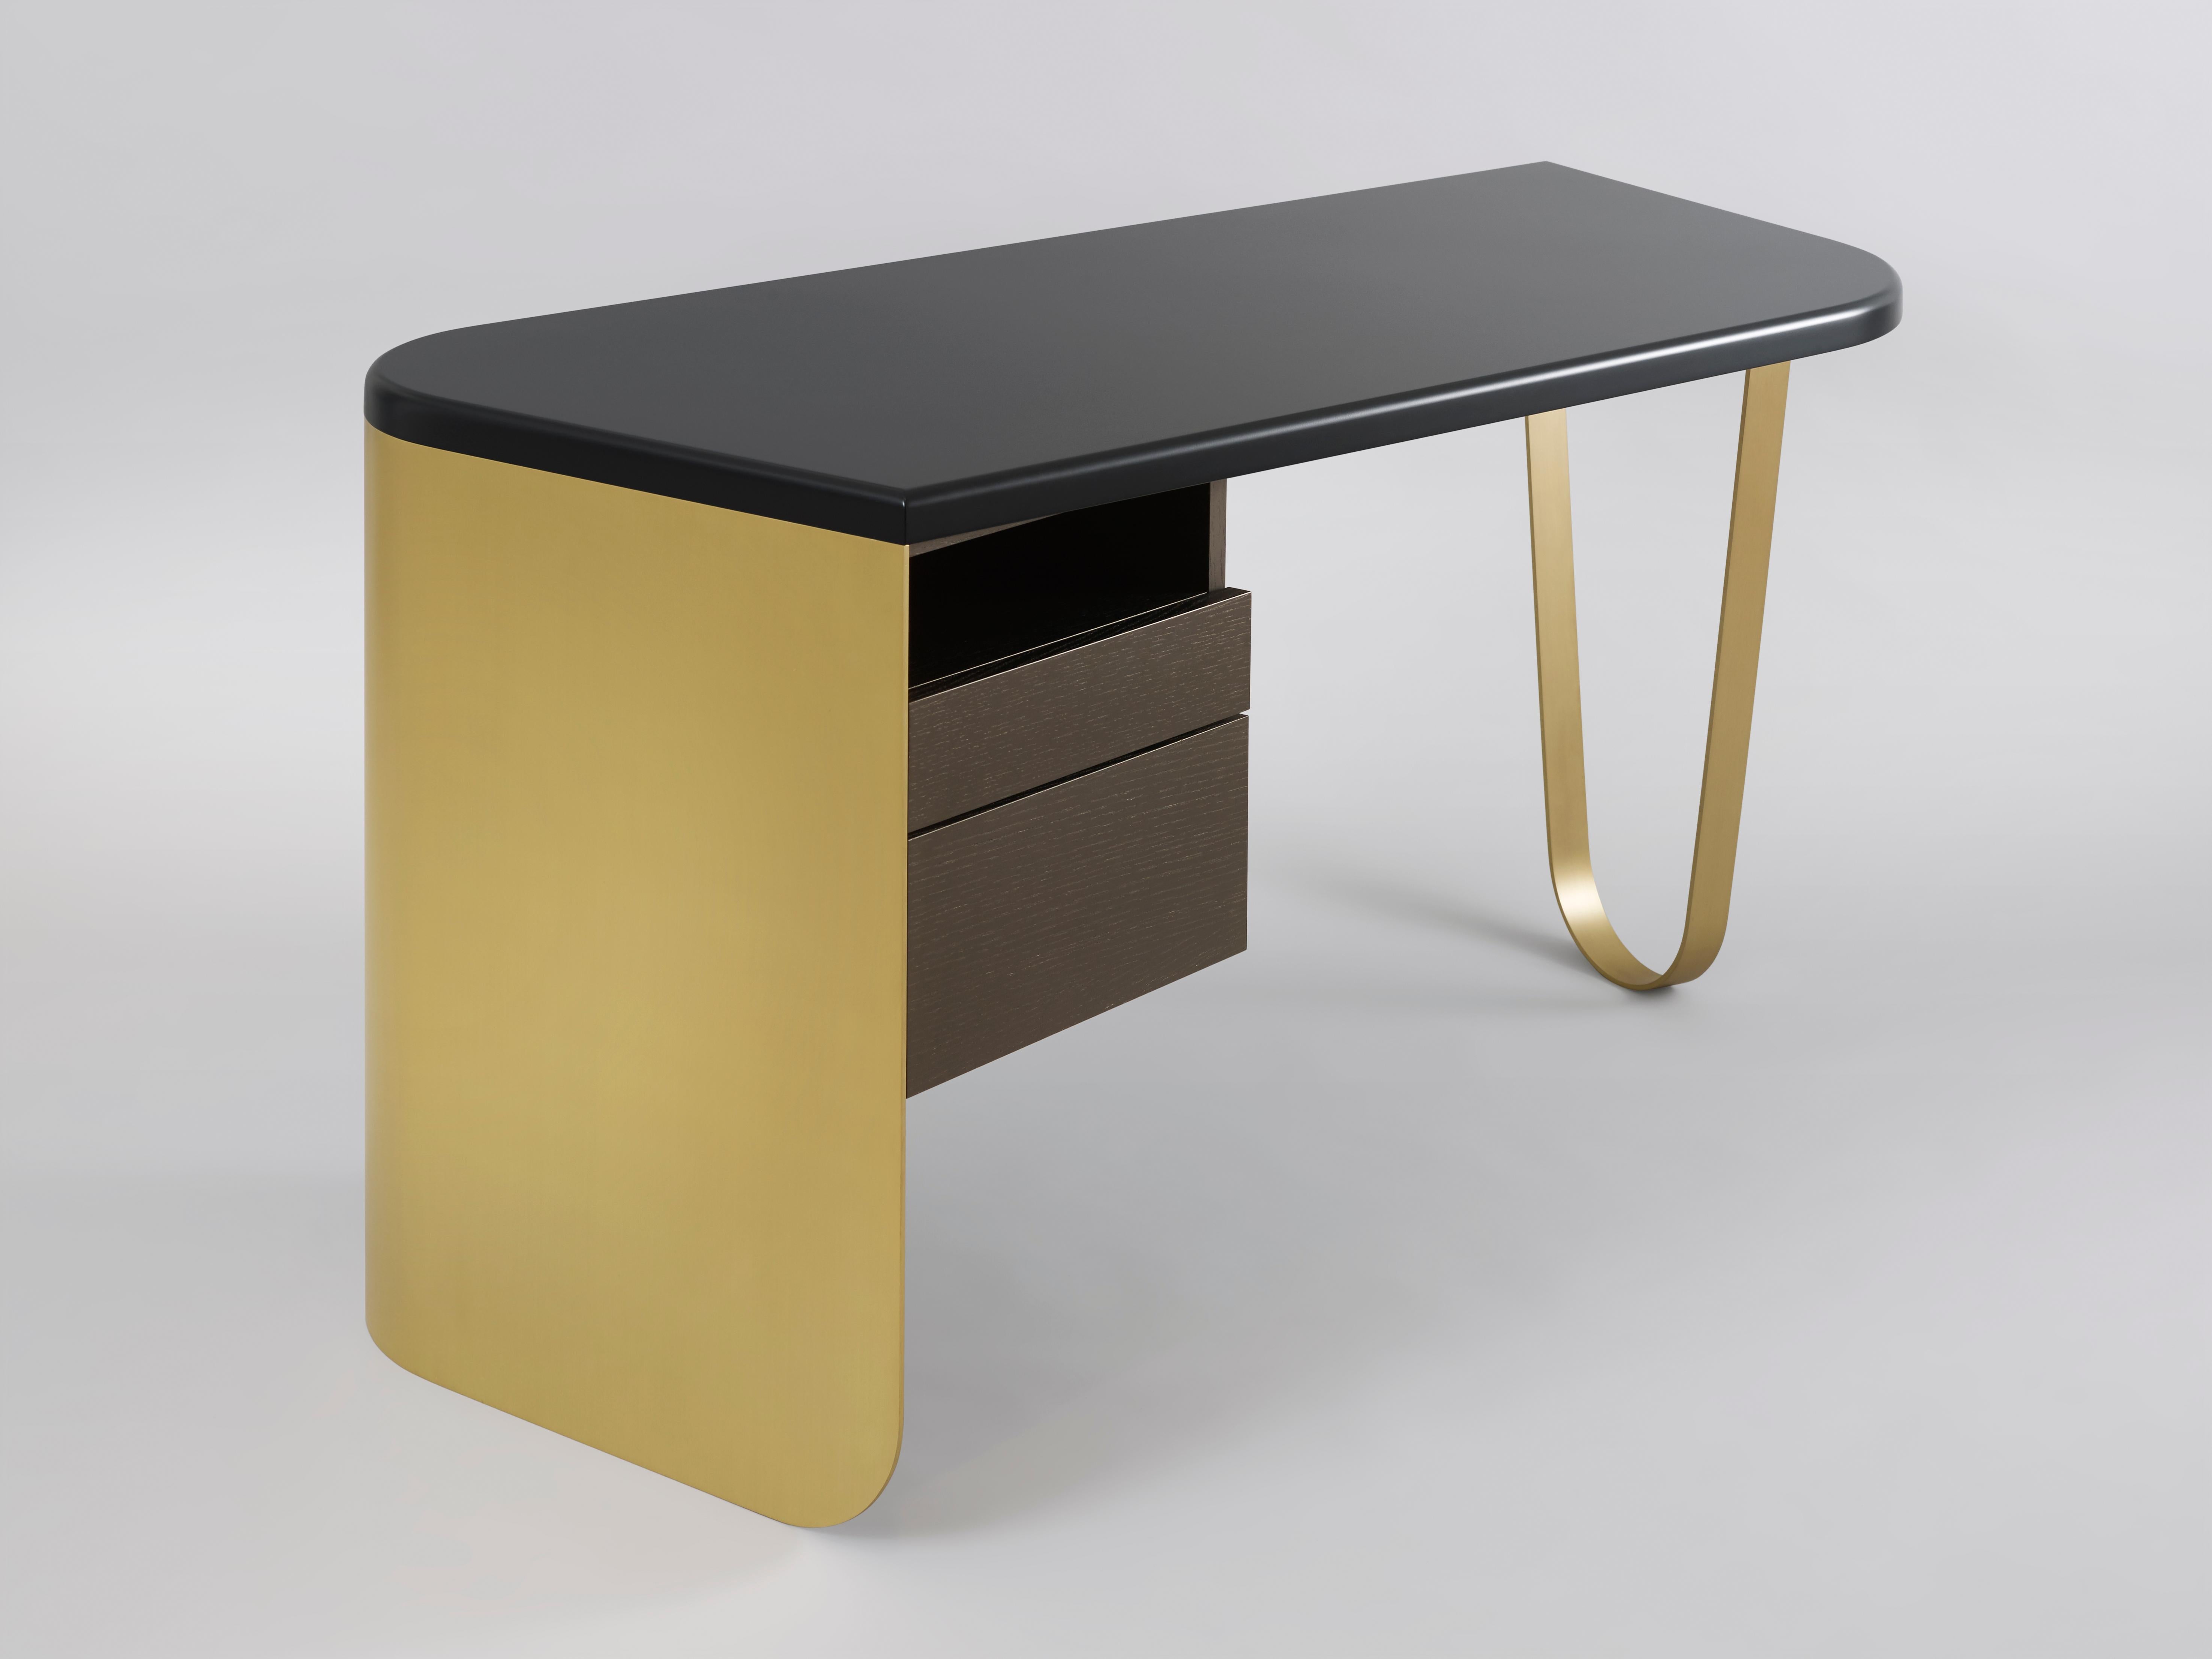 ‘Écritoire’ Desk (Lacquered) by French Lebanese Charles Kalpakian is a true gem, resounding in its elegance, simplicity, graphic unity and the complementarity of materials. Curves and straight lines fuse in an organic geometry. The satin glow of the